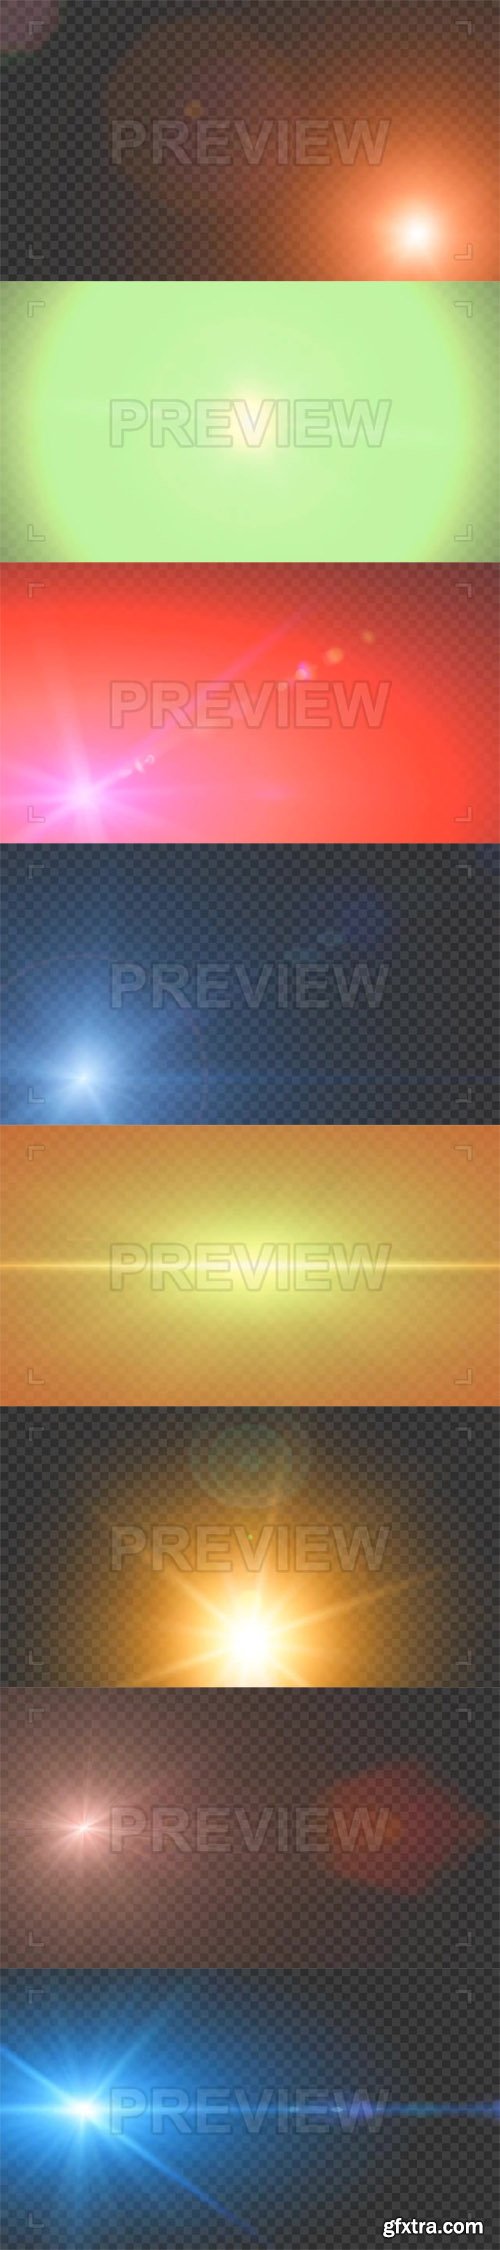 MA - Lens Flares Transitions